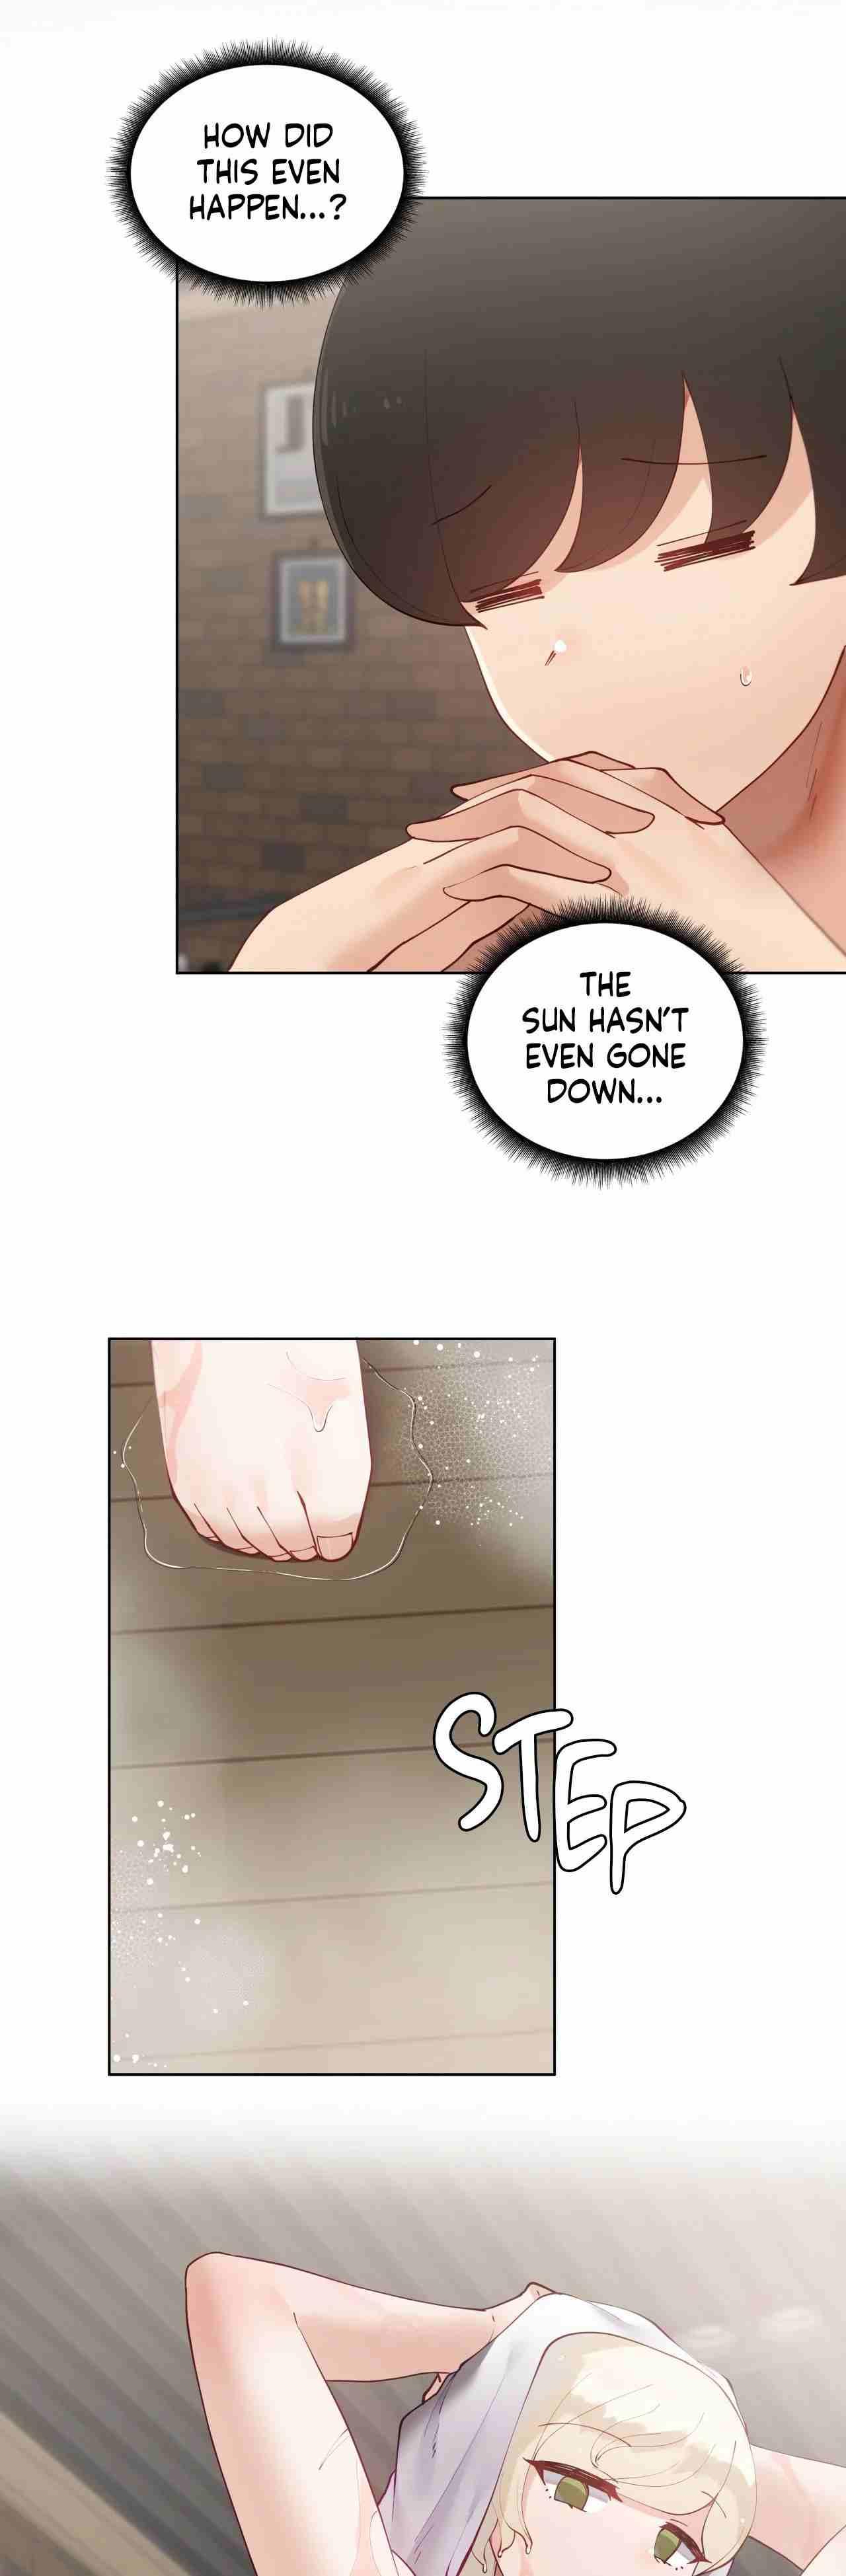 Amature Porn [Over.J, Choi Tae-young] Learning the Hard Way 2nd Season (After Story) Ch.1/? [English] [Manhwa PDF] Ongoing 8teenxxx - Page 3